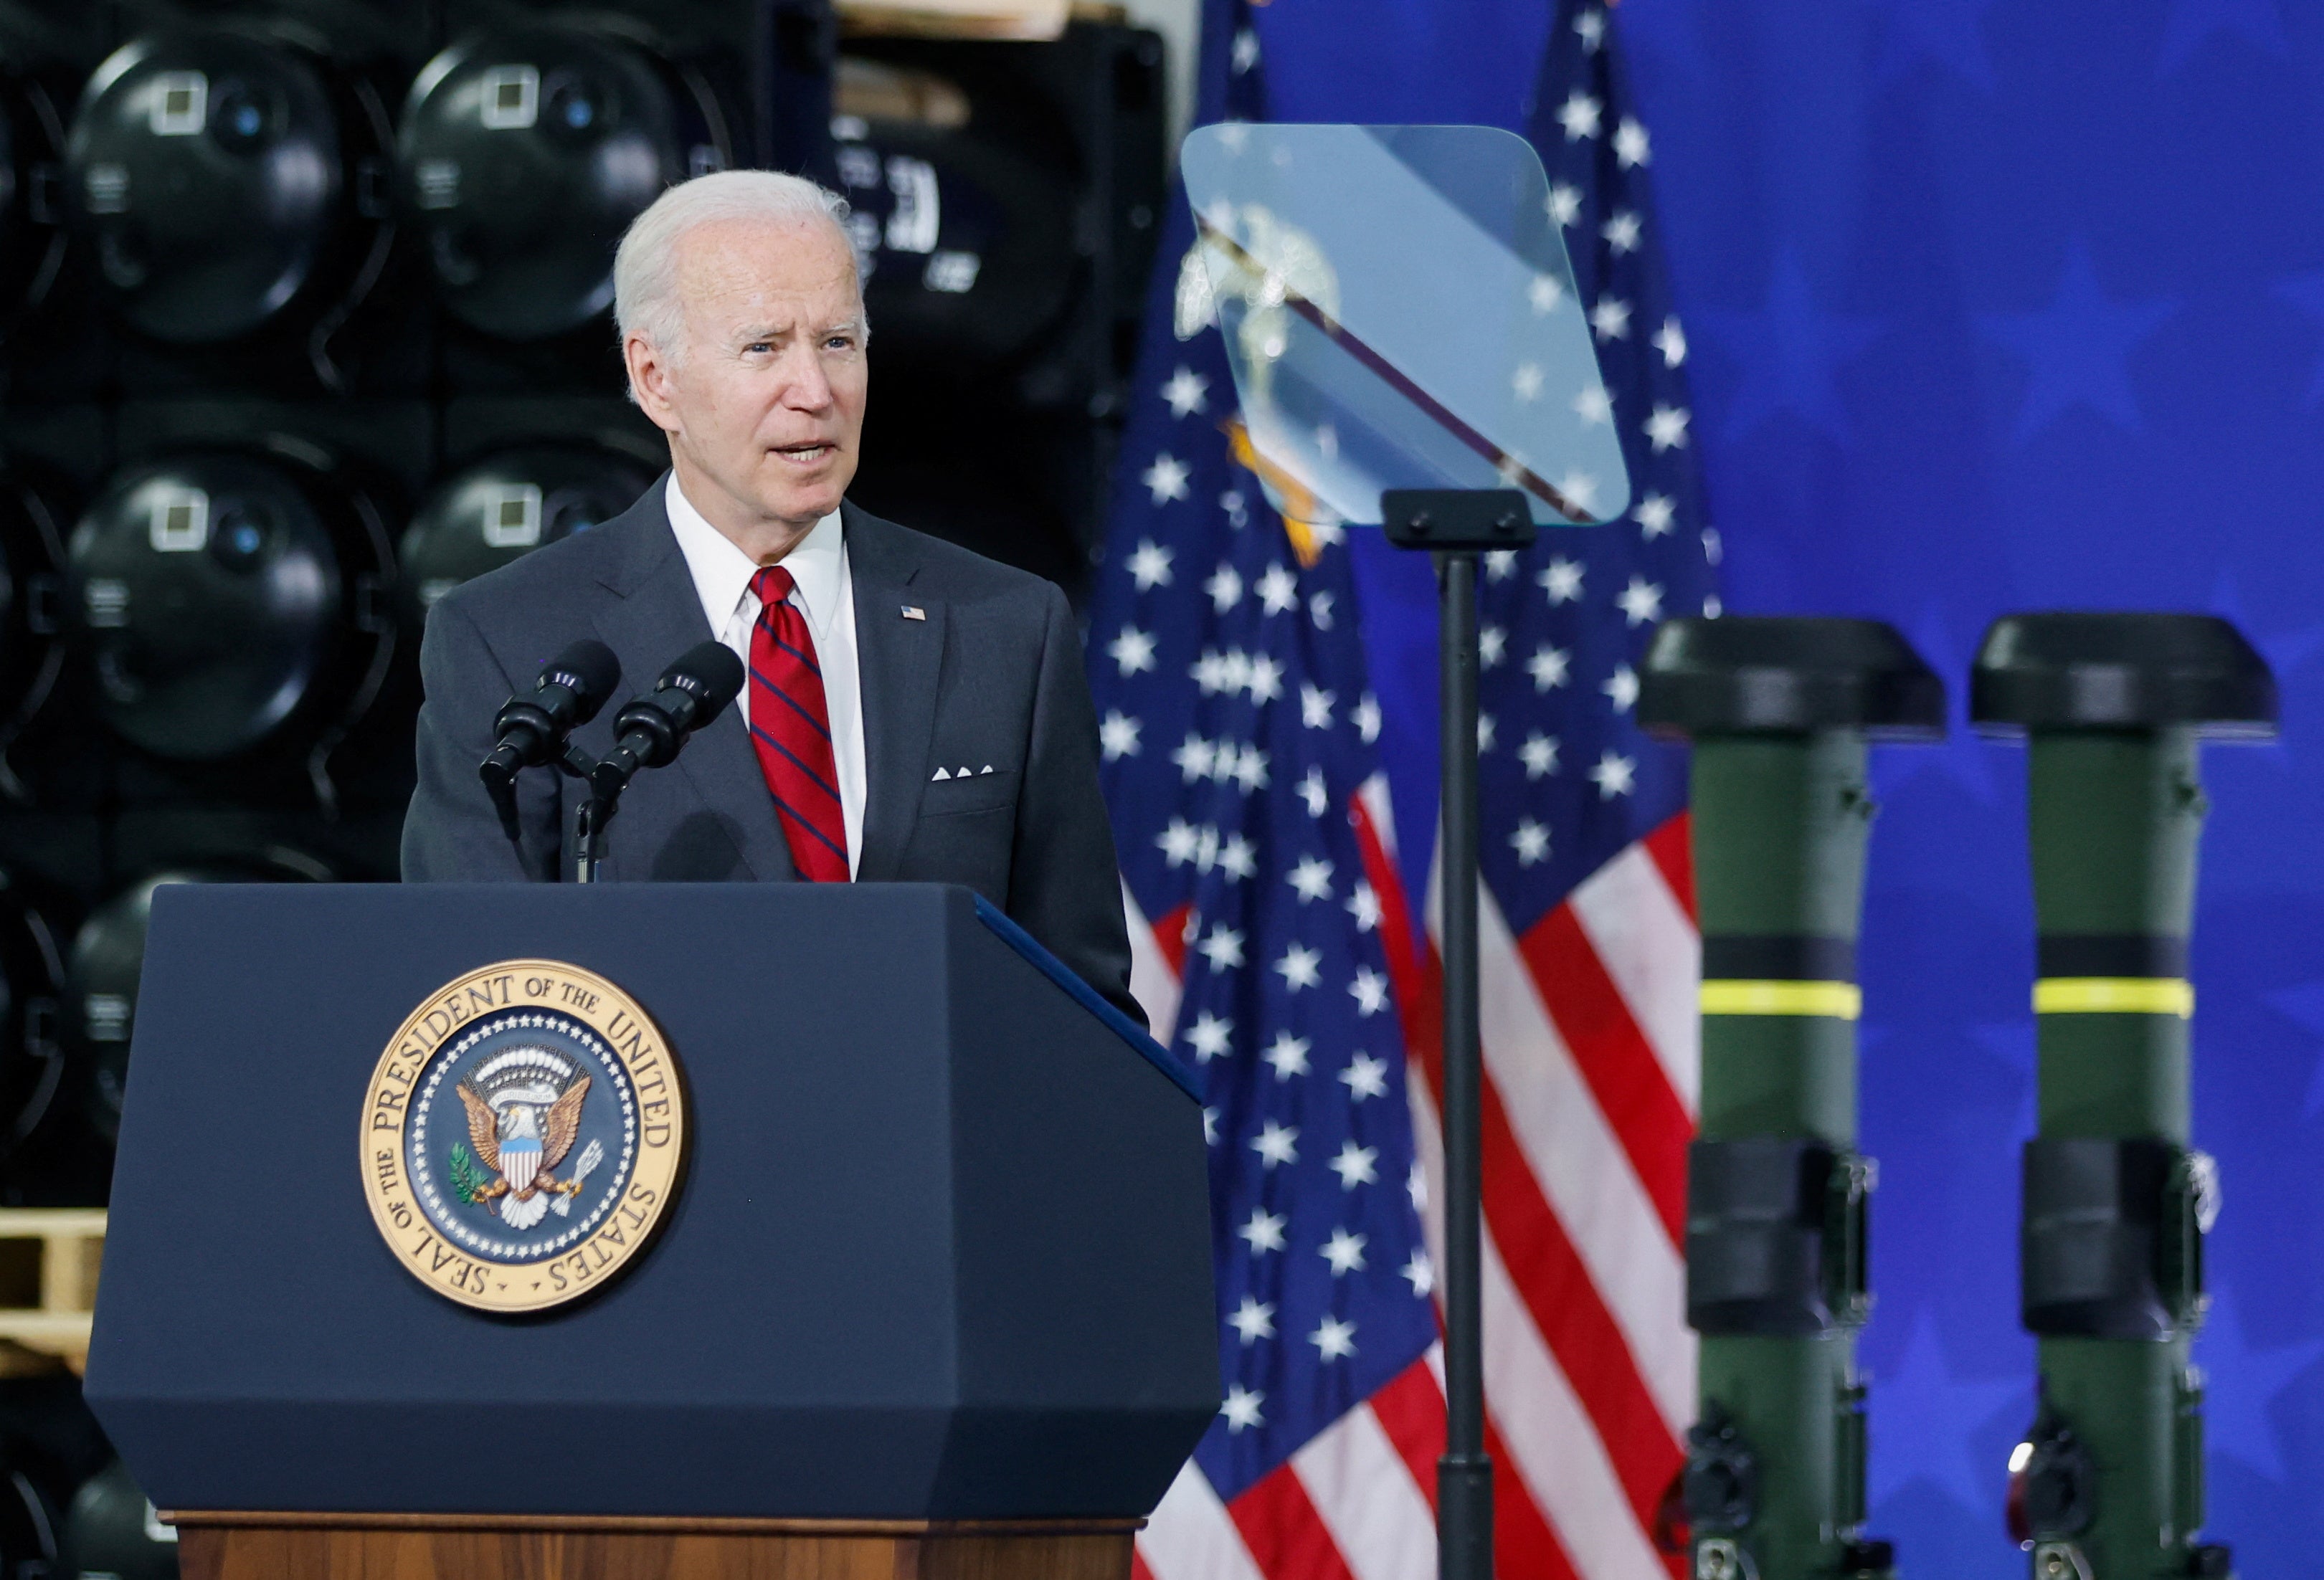 Joe Biden delivers remarks on arming Ukraine, after touring a Lockheed Martin weapons factory in Troy, Alabama